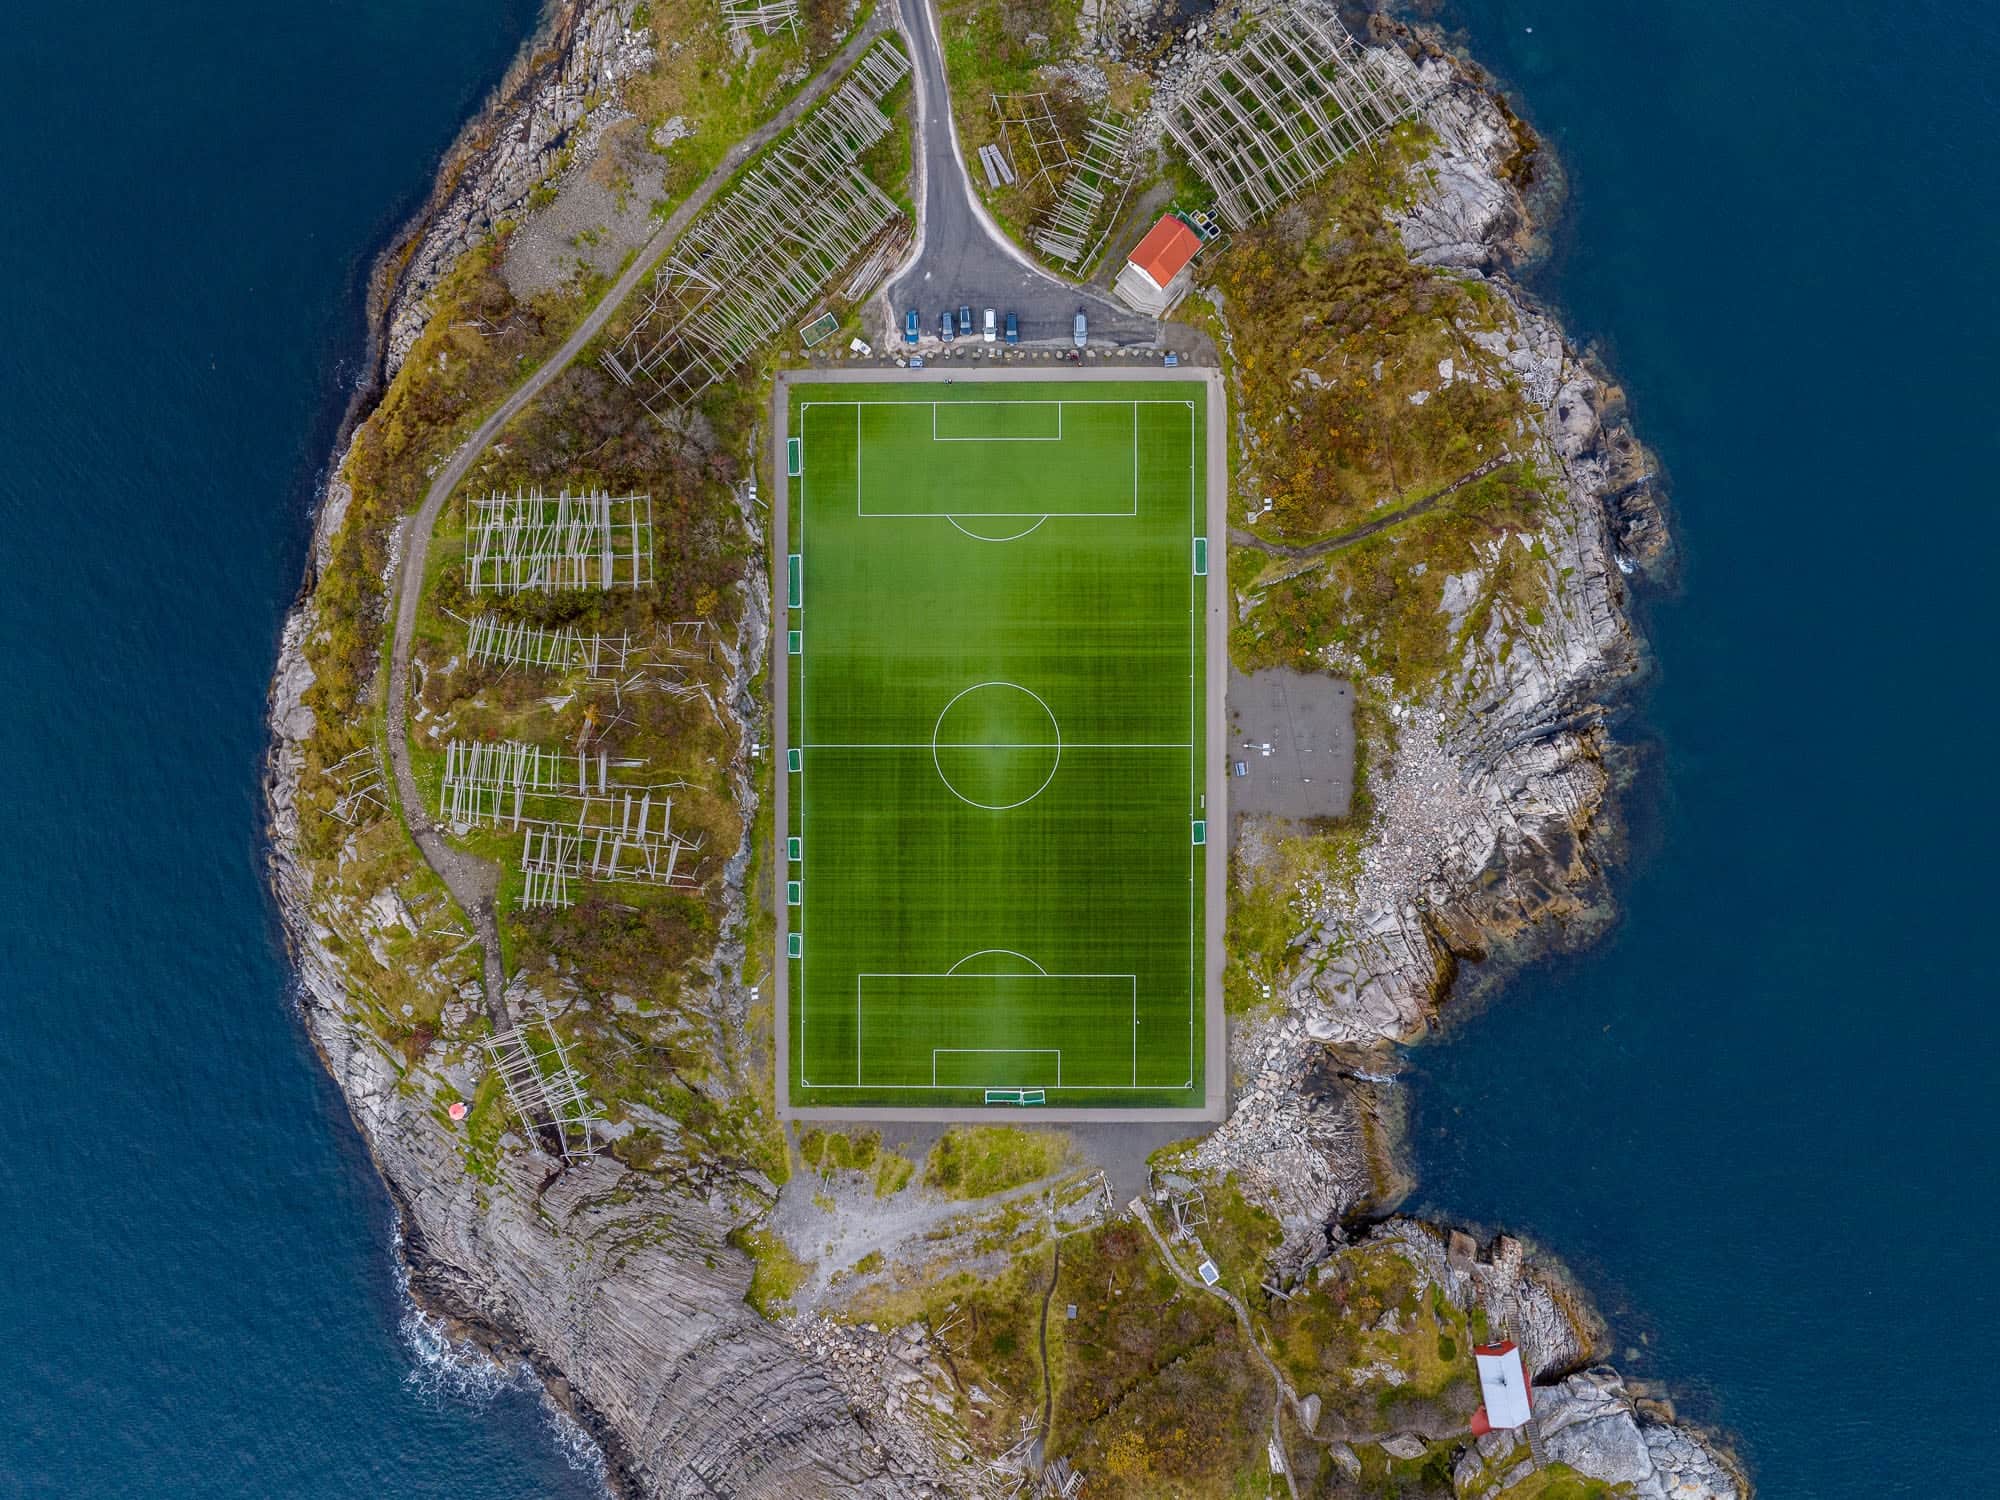 Aerial view of Henningsvær Stadium in Lofoten, Norway, with a soccer field surrounded by rocky terrain and sea.